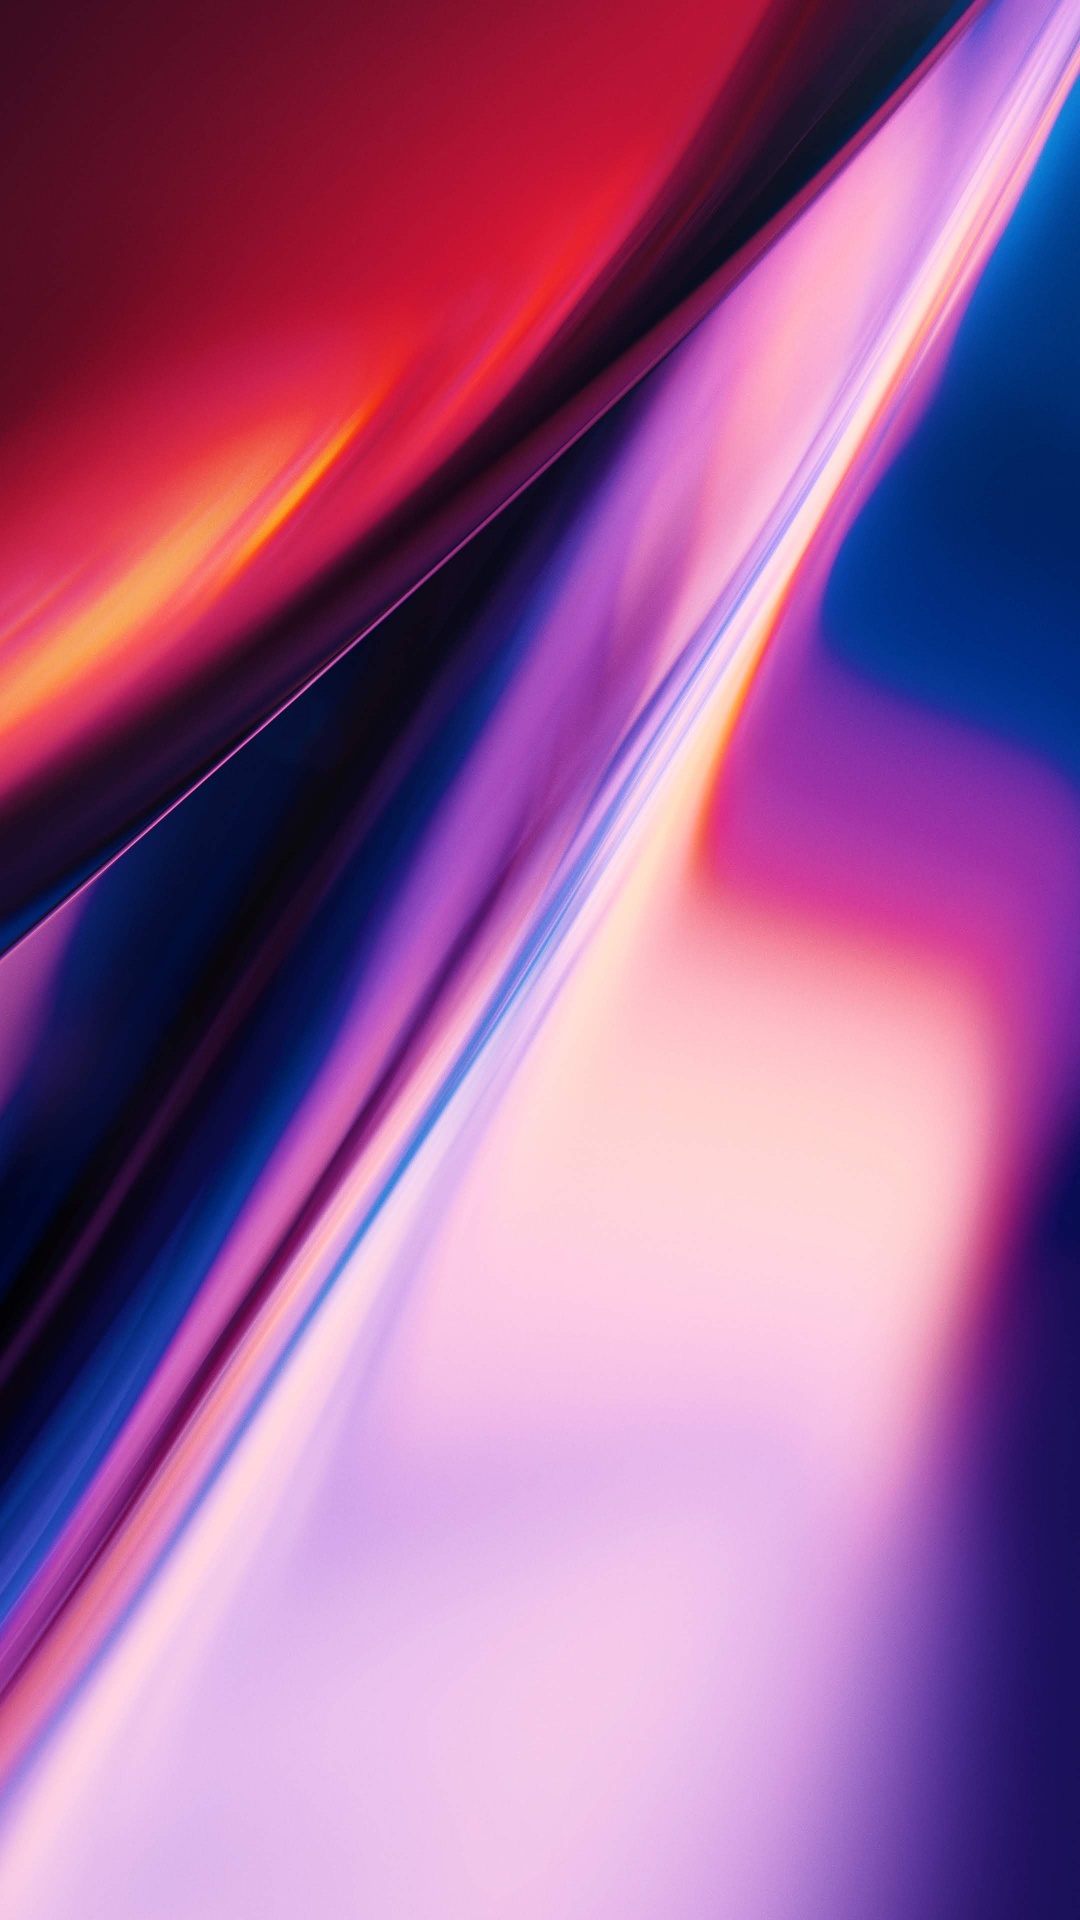 OnePlus 7 Pro, Oneplus 7t, Oneplus 8, Android, Azul. Wallpaper in 1080x1920 Resolution